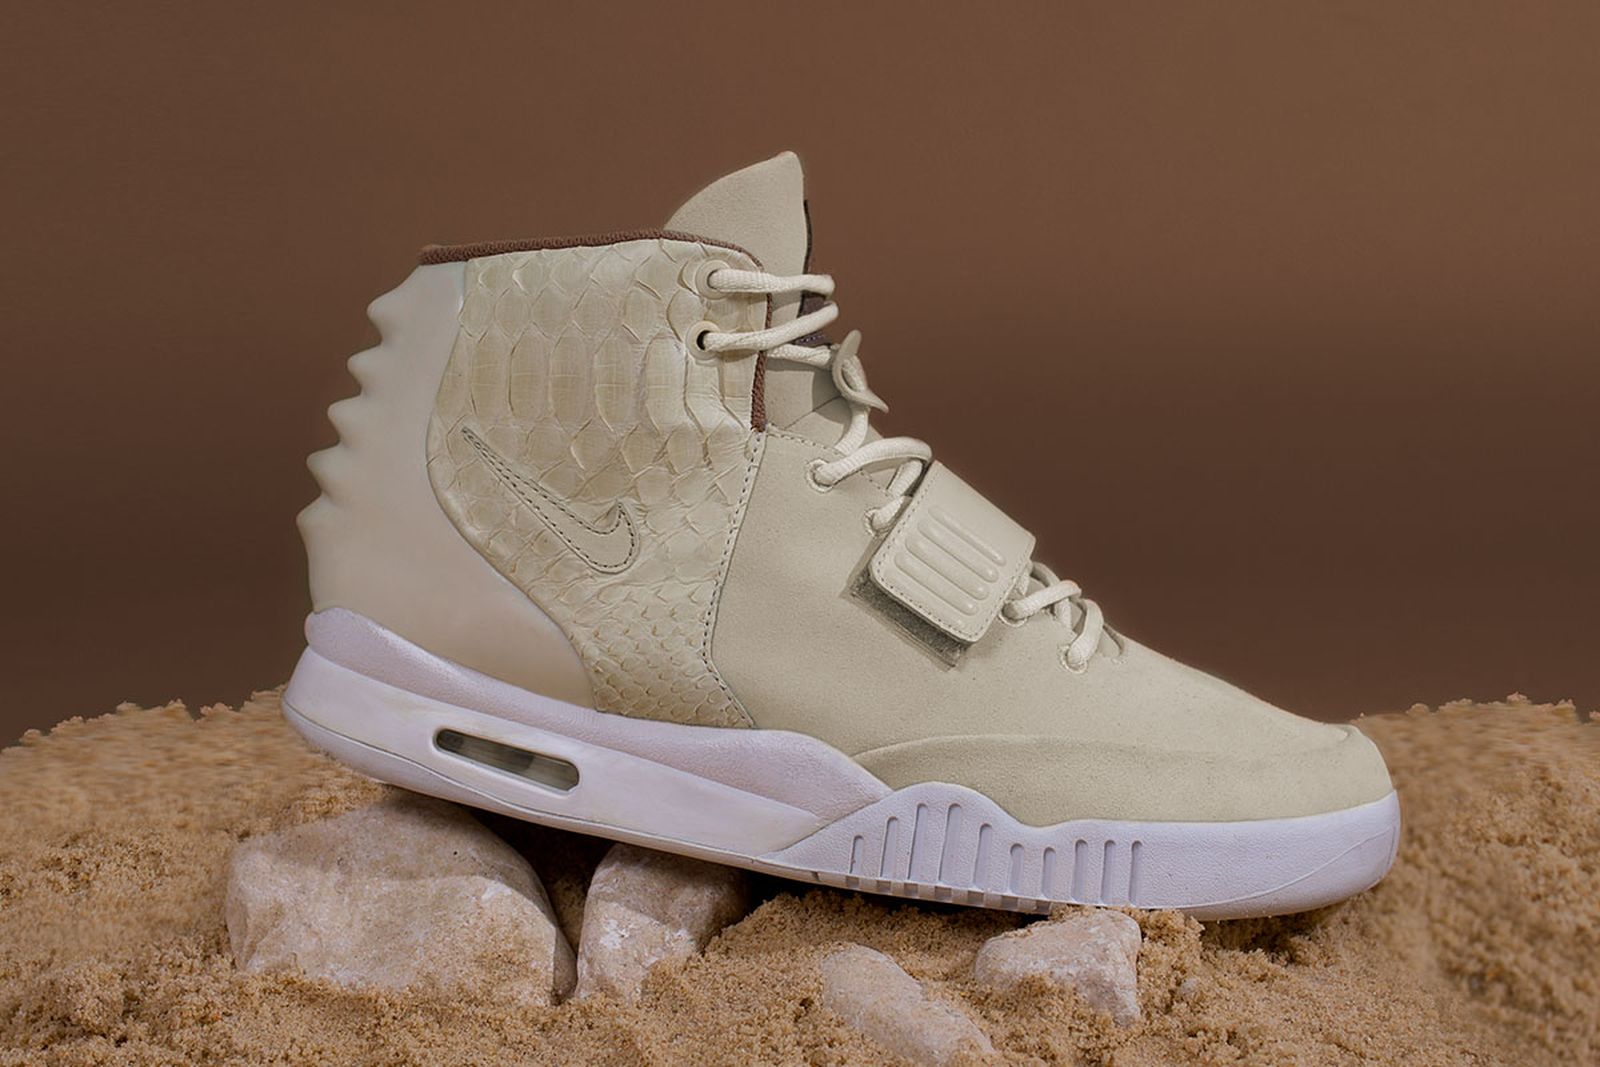 Take a Look at Ceeze's Nike Air Yeezy 2 "Pharaoh"